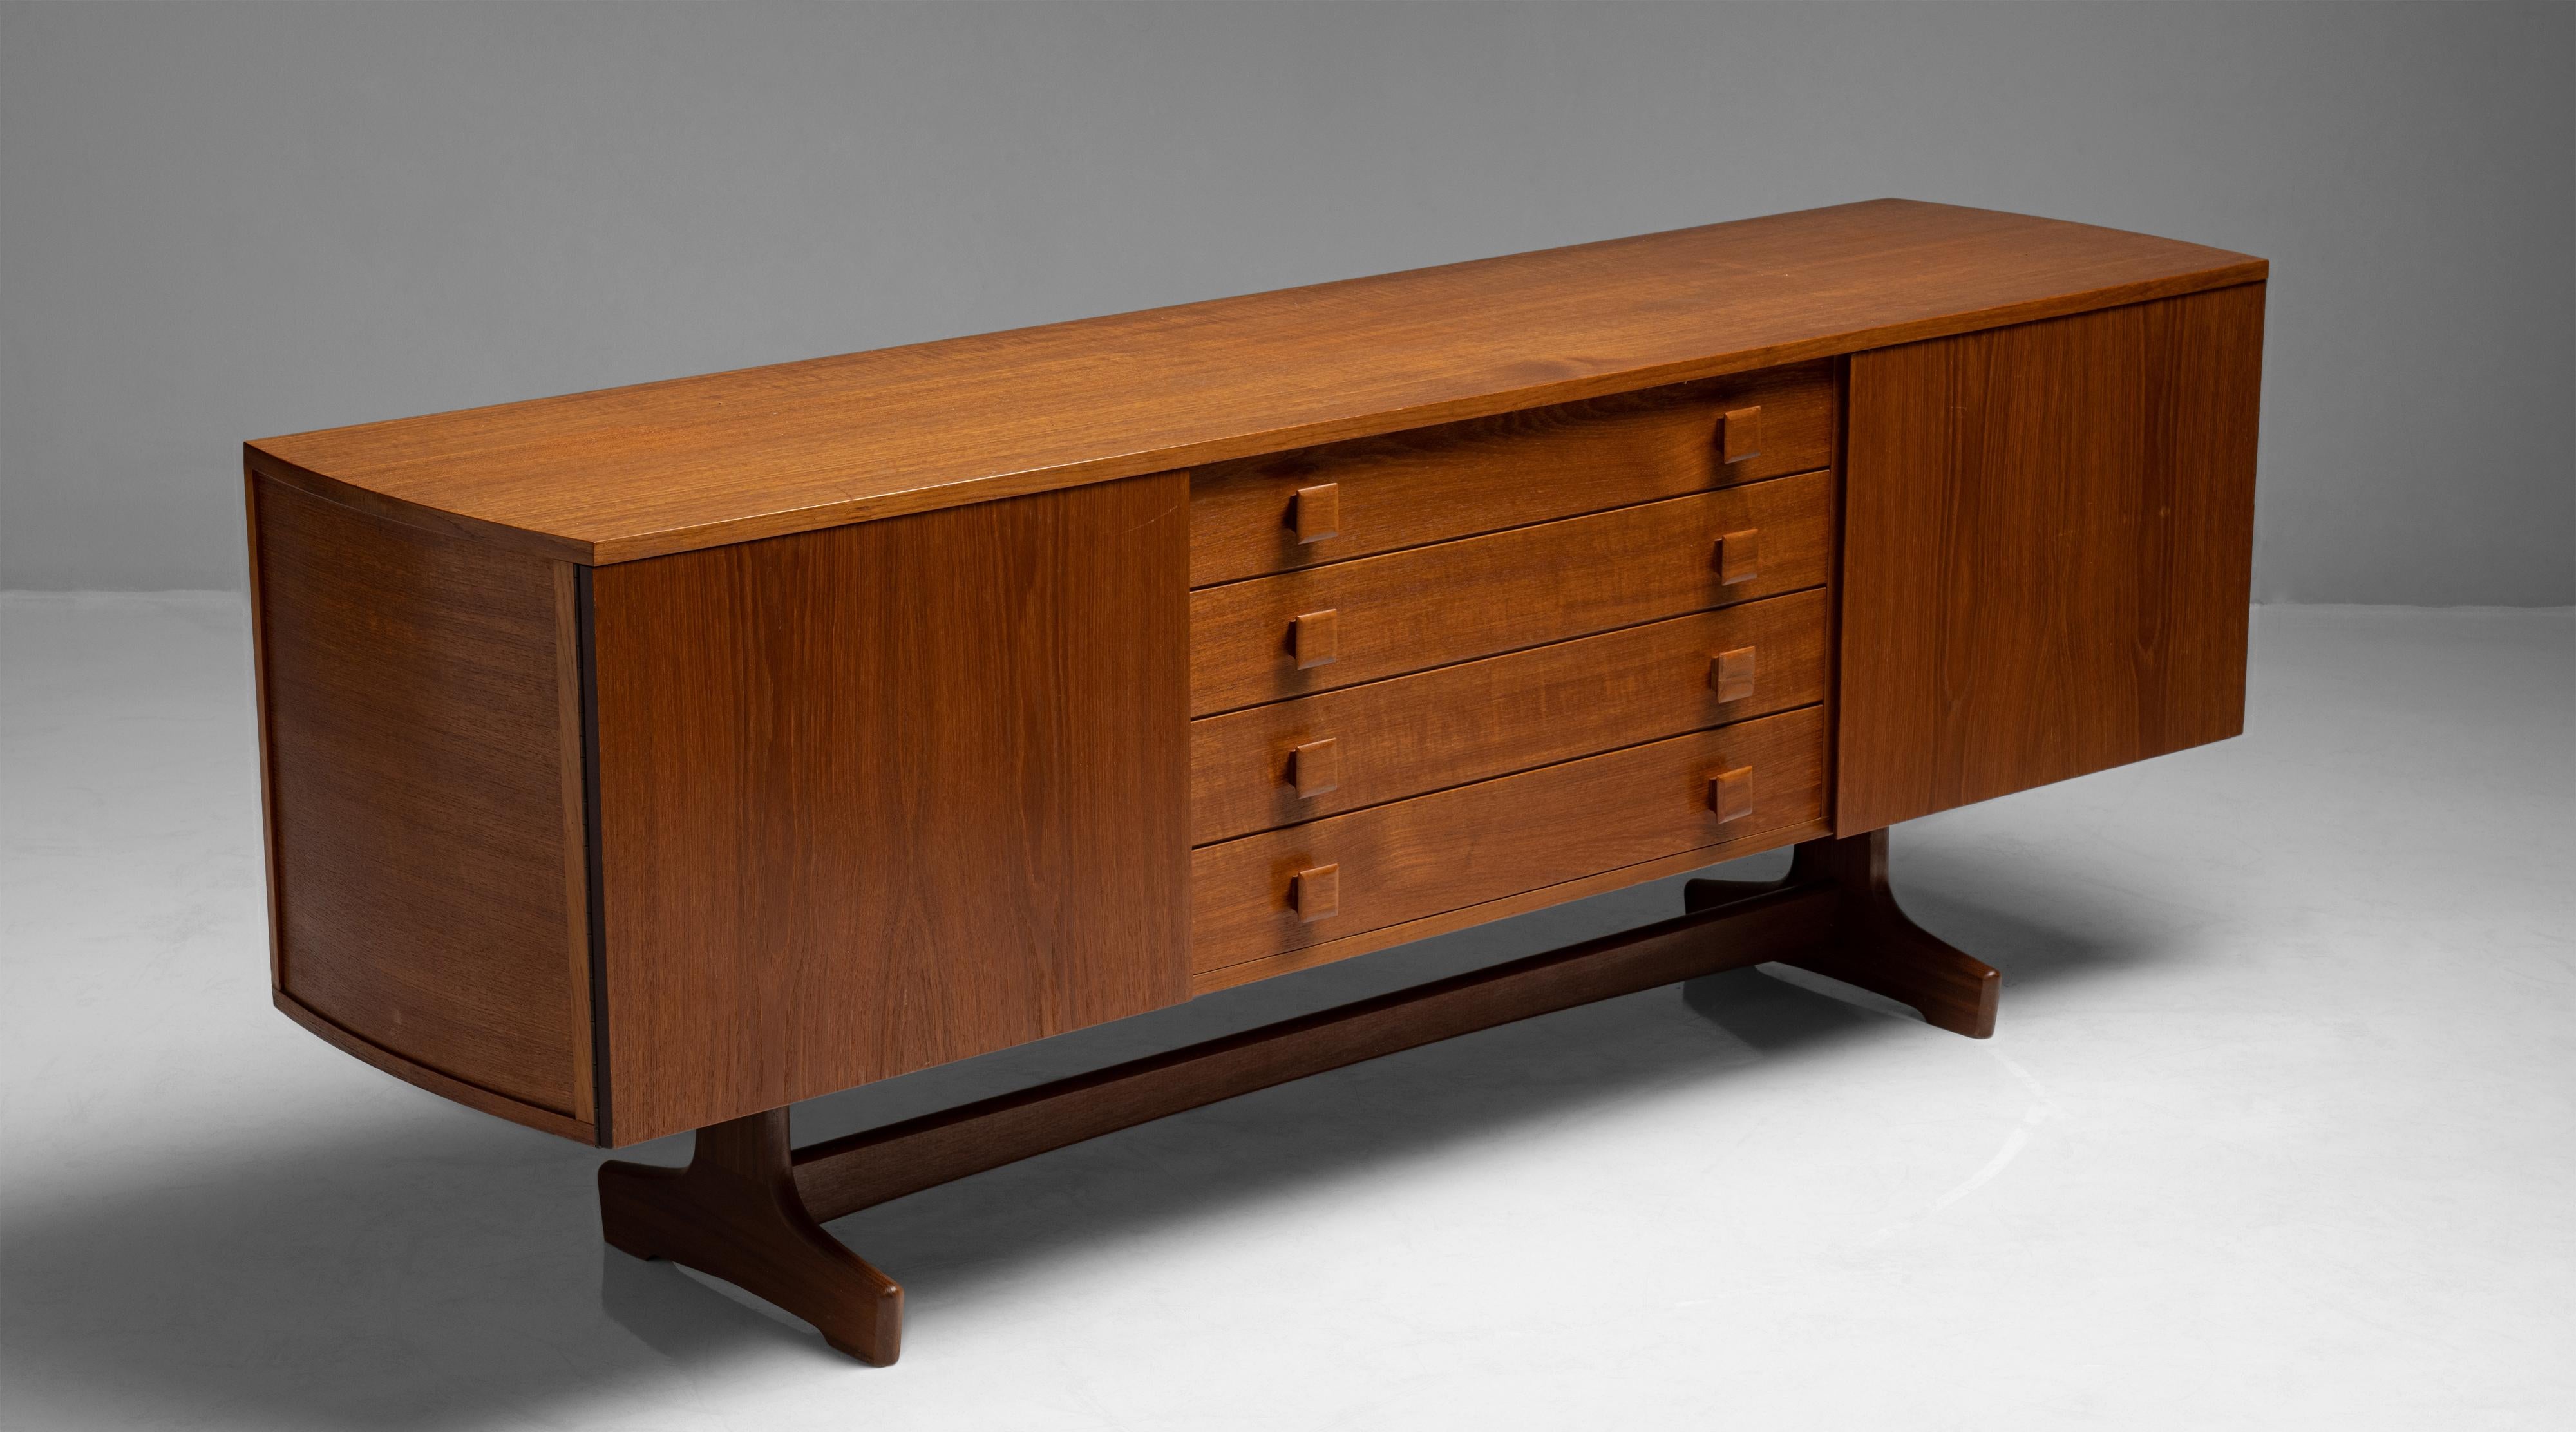 Vanson sideboard
England circa 1960
Teak sideboard by Vanson with veneered back and birch lined interior.
Measures: 79.75” W x 16” D x 38.5” H

$ 5,800.